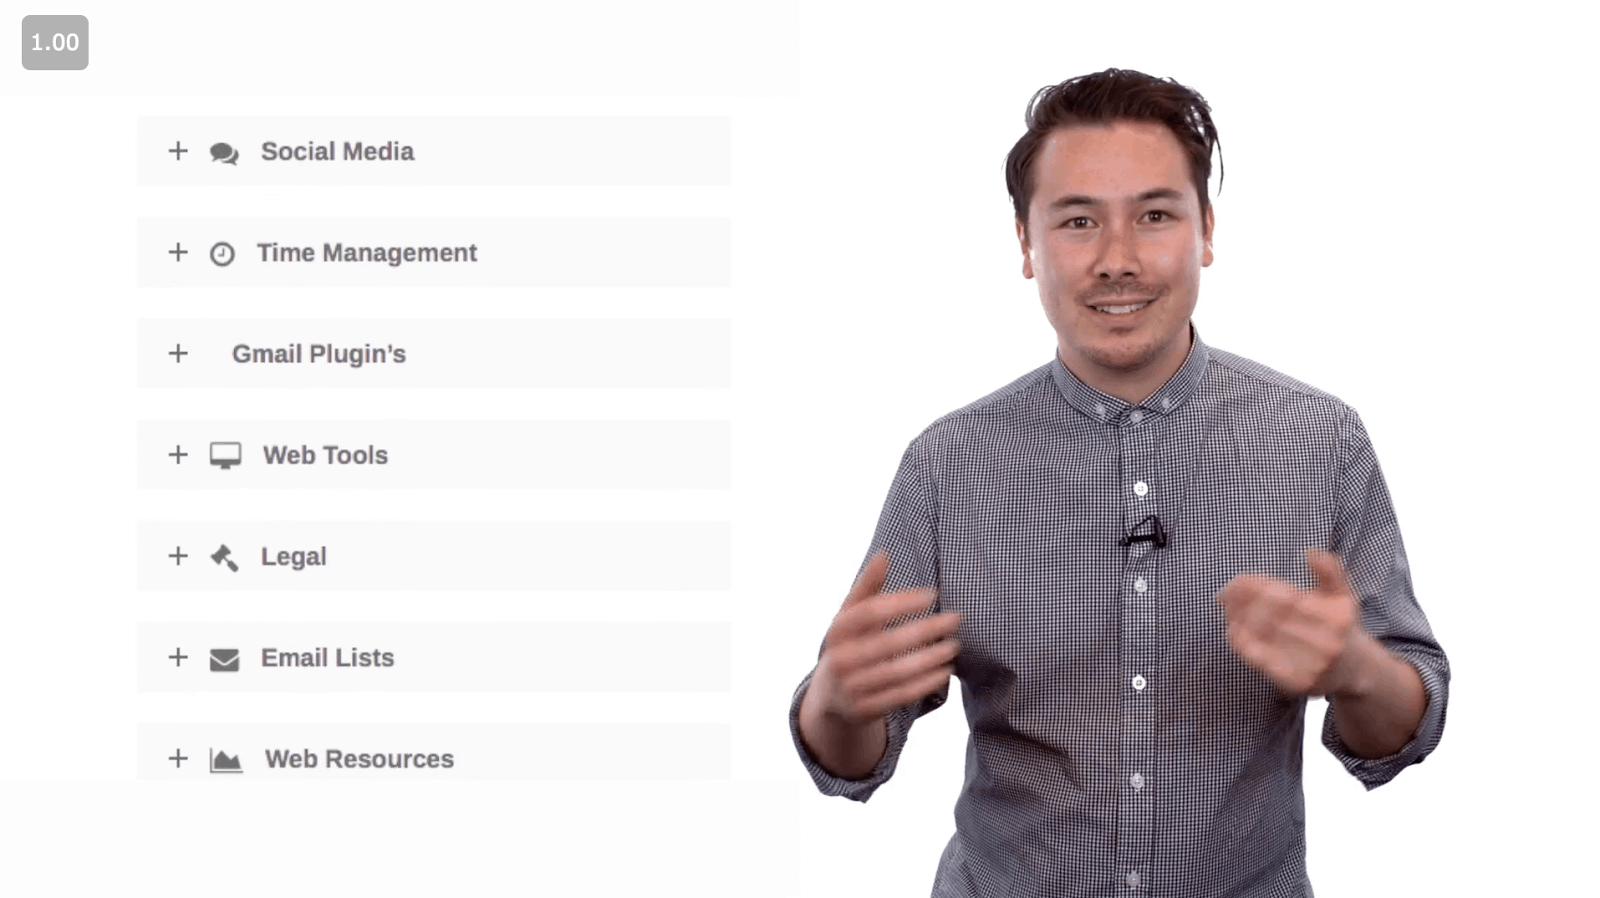 how to create a membership websites foundr club welcome video nathan chan